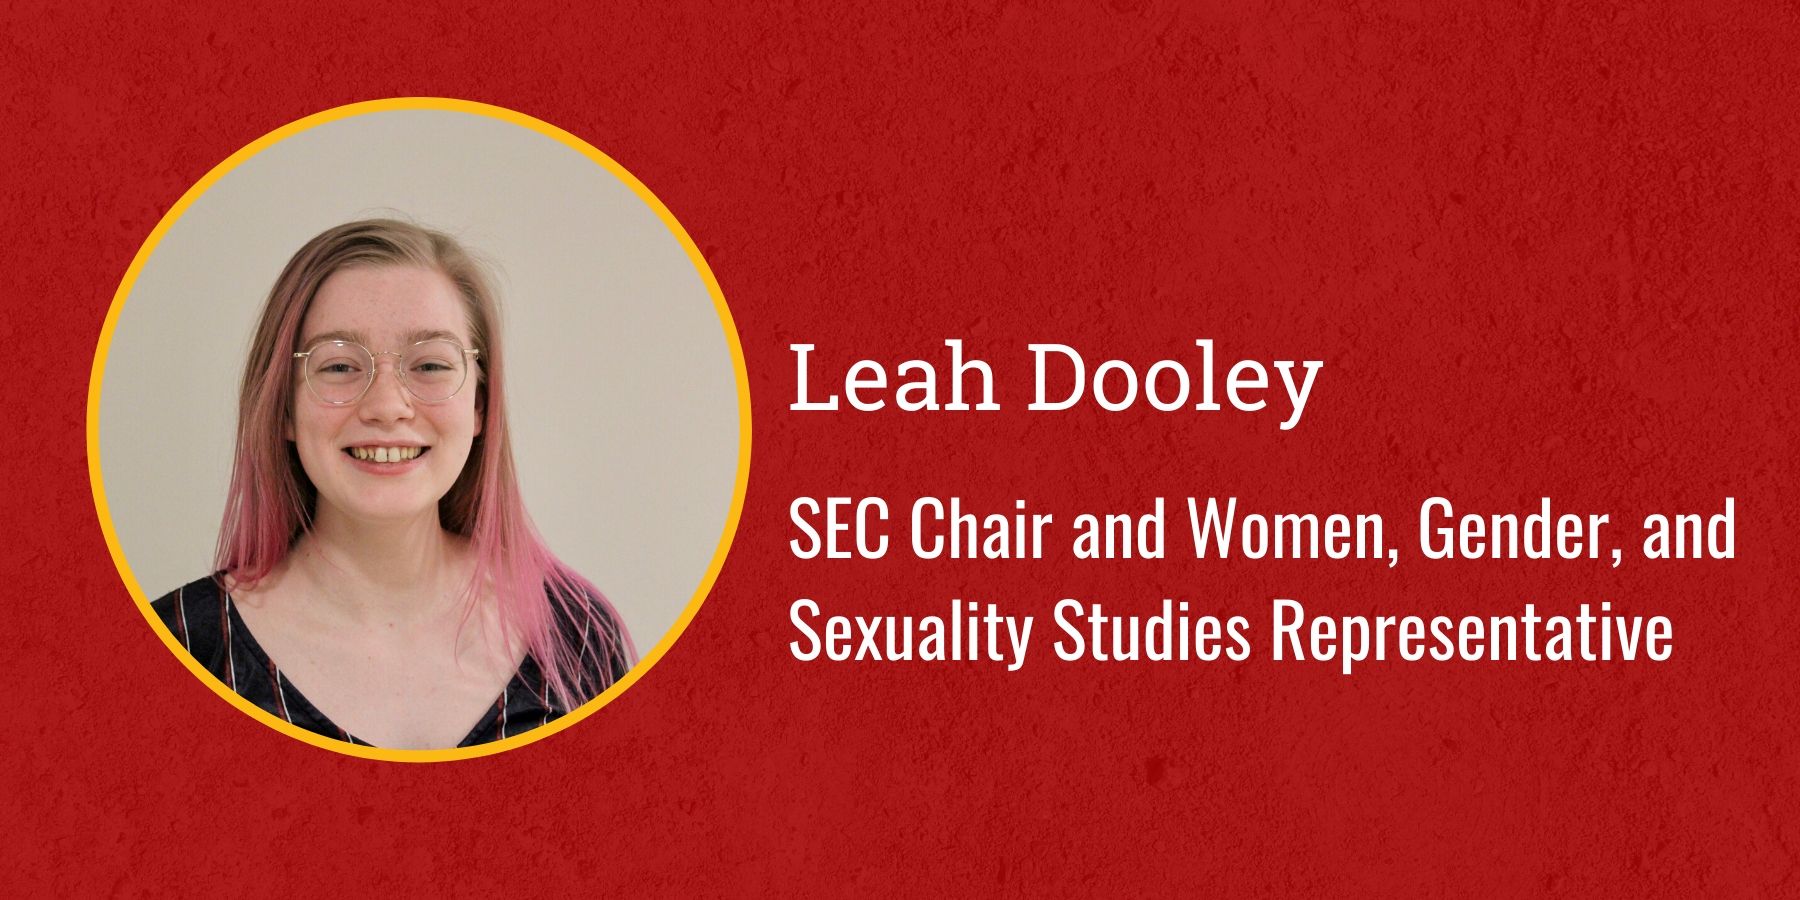 Photo of Leah Dooley and text SEC Chair and Women, Gender, and Sexuality Studies Representative